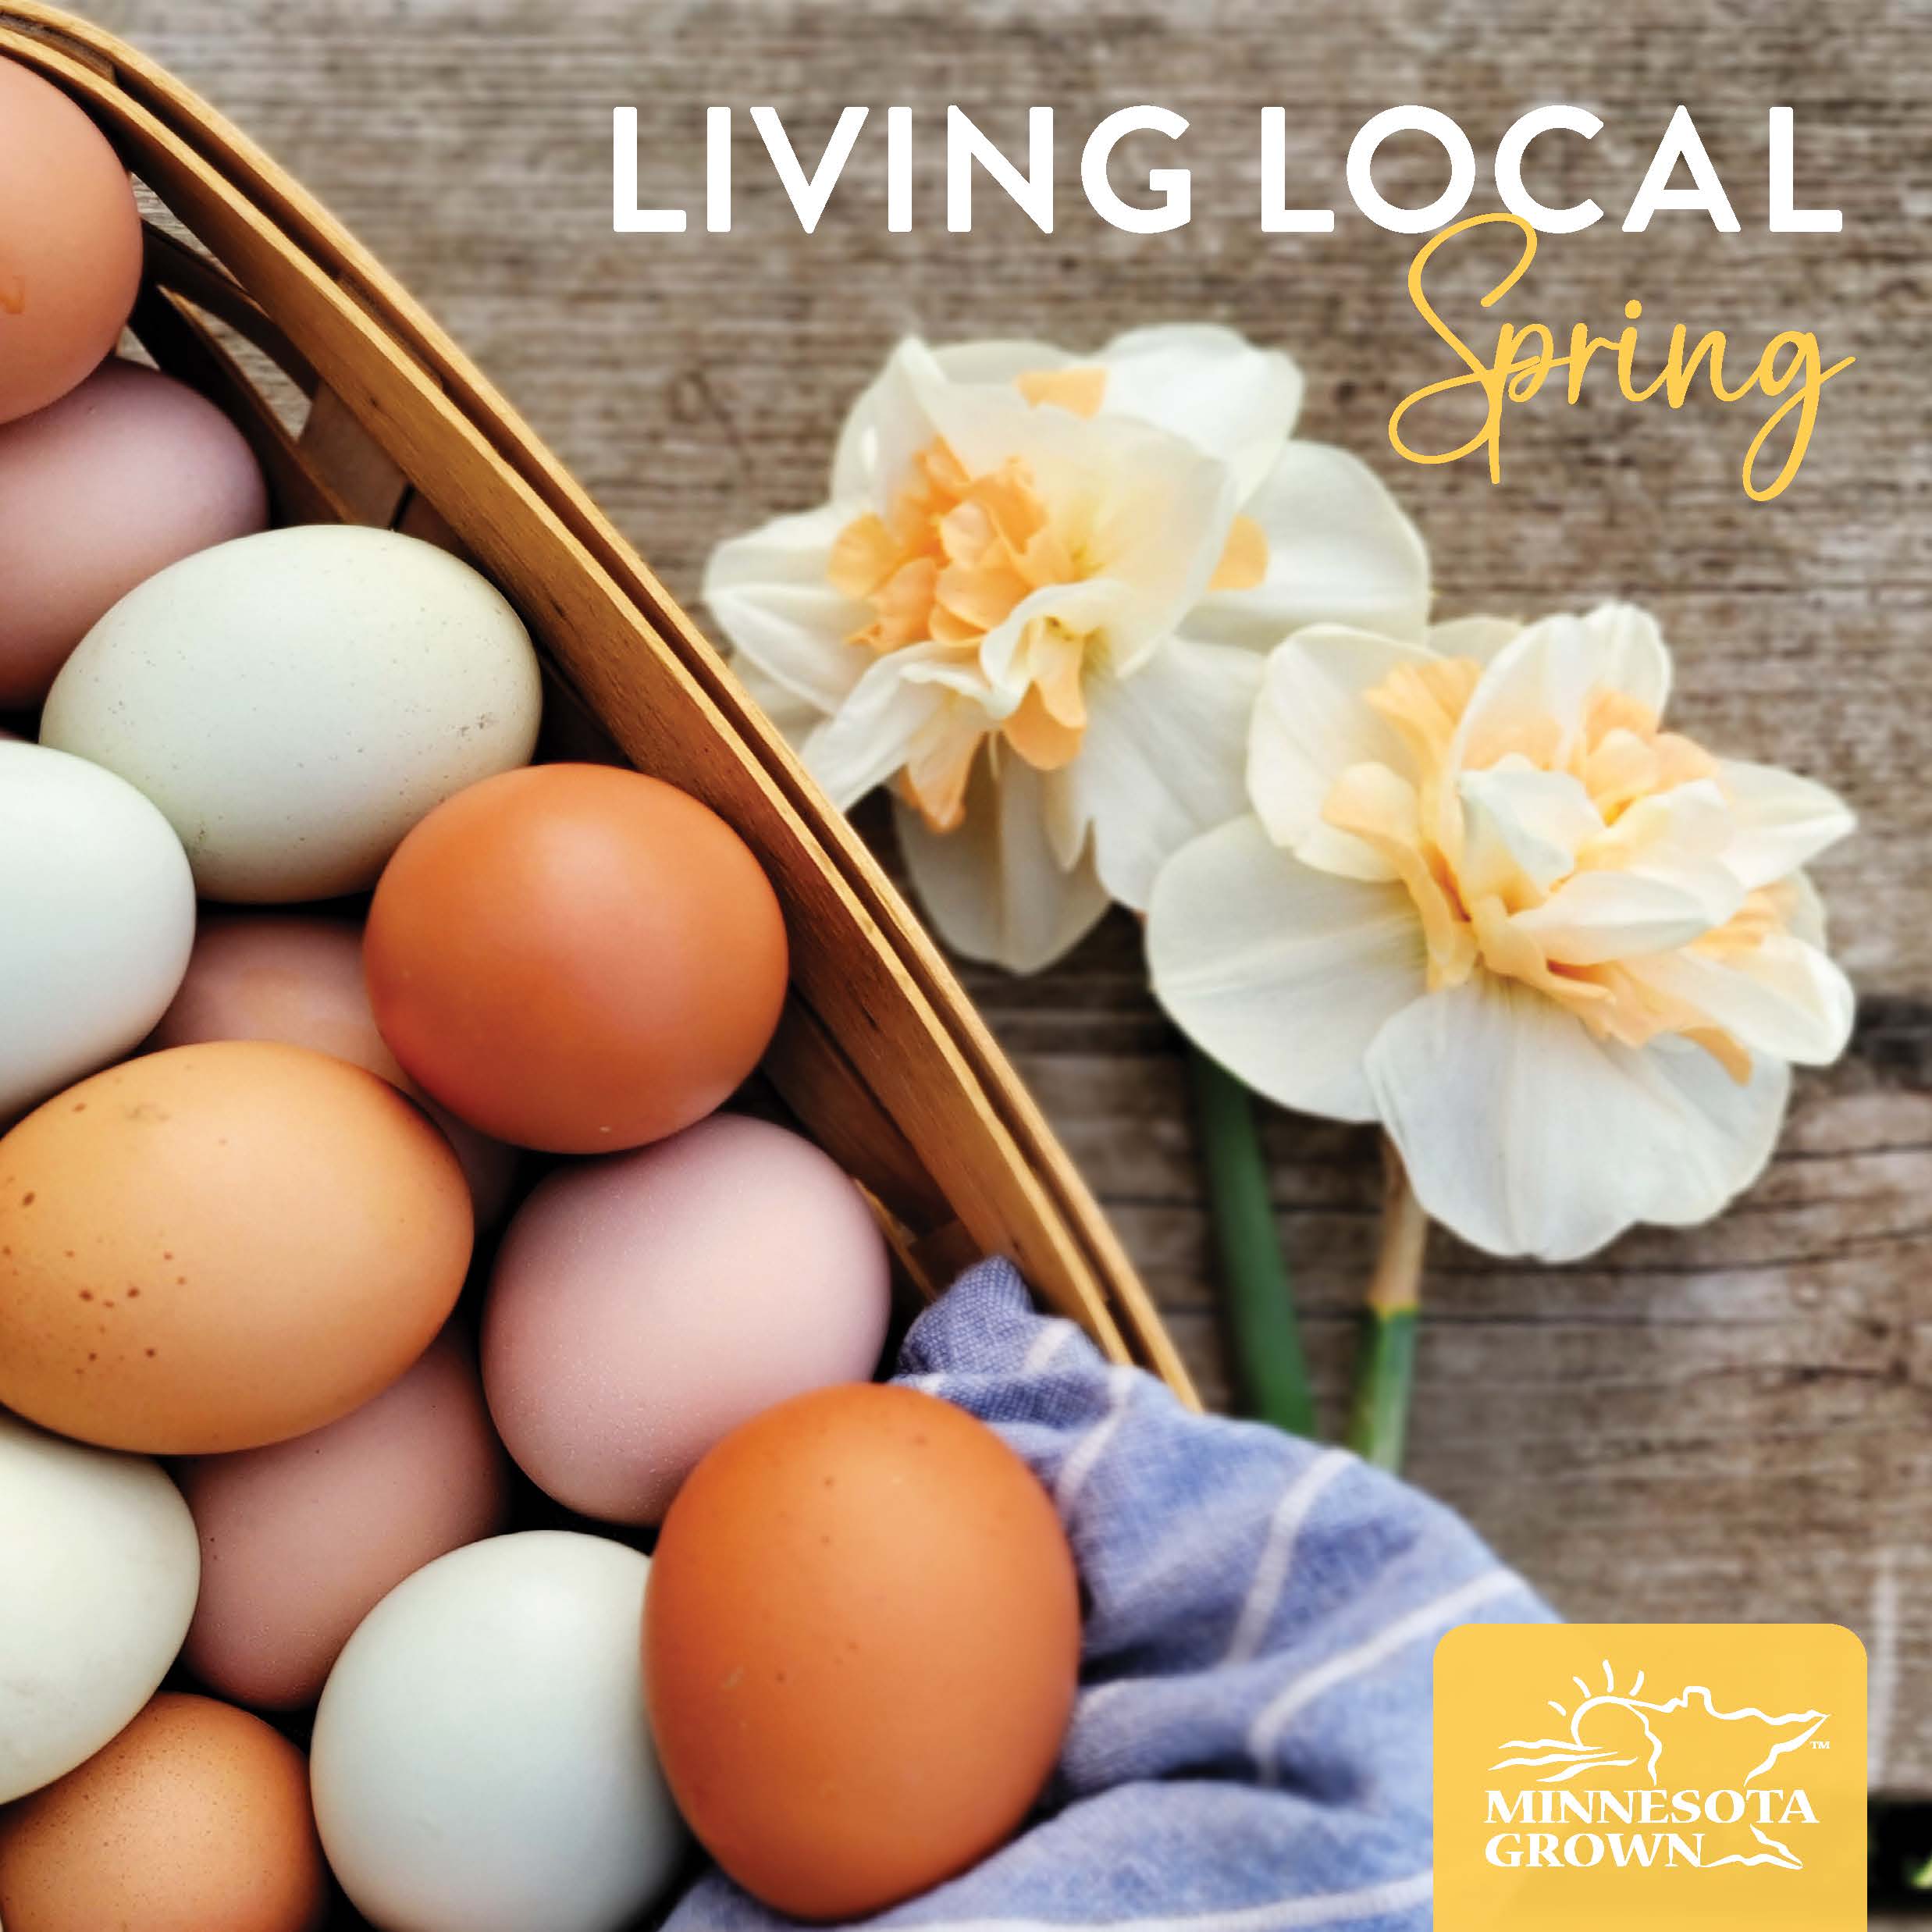 Living Local spring issue cover with fresh eggs and daffodils.